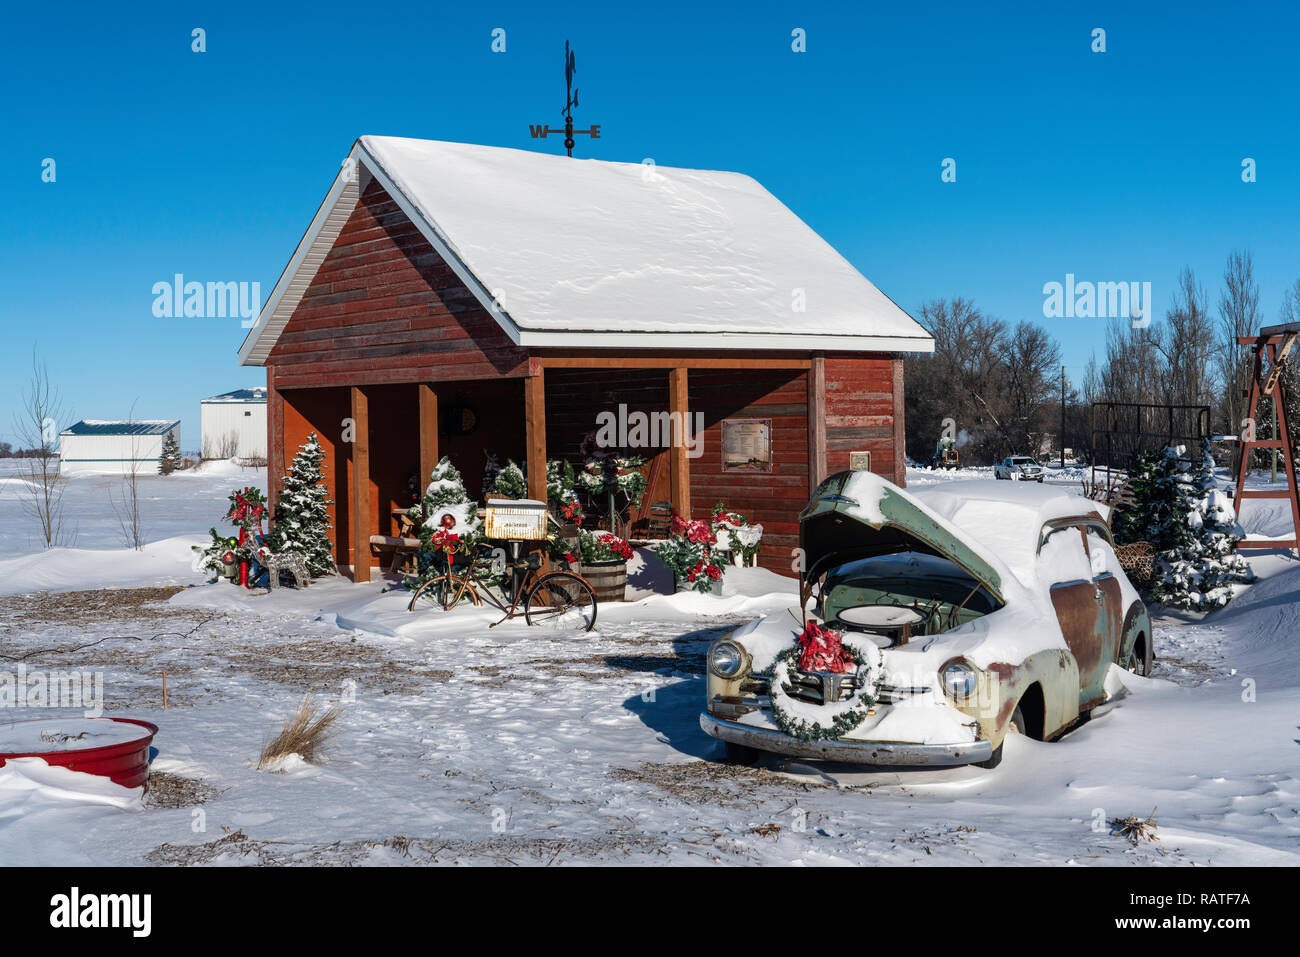 Il Parkside Pioneer Patch a Natale con neve invernale in Winkler, Manitoba, Canada. Foto Stock